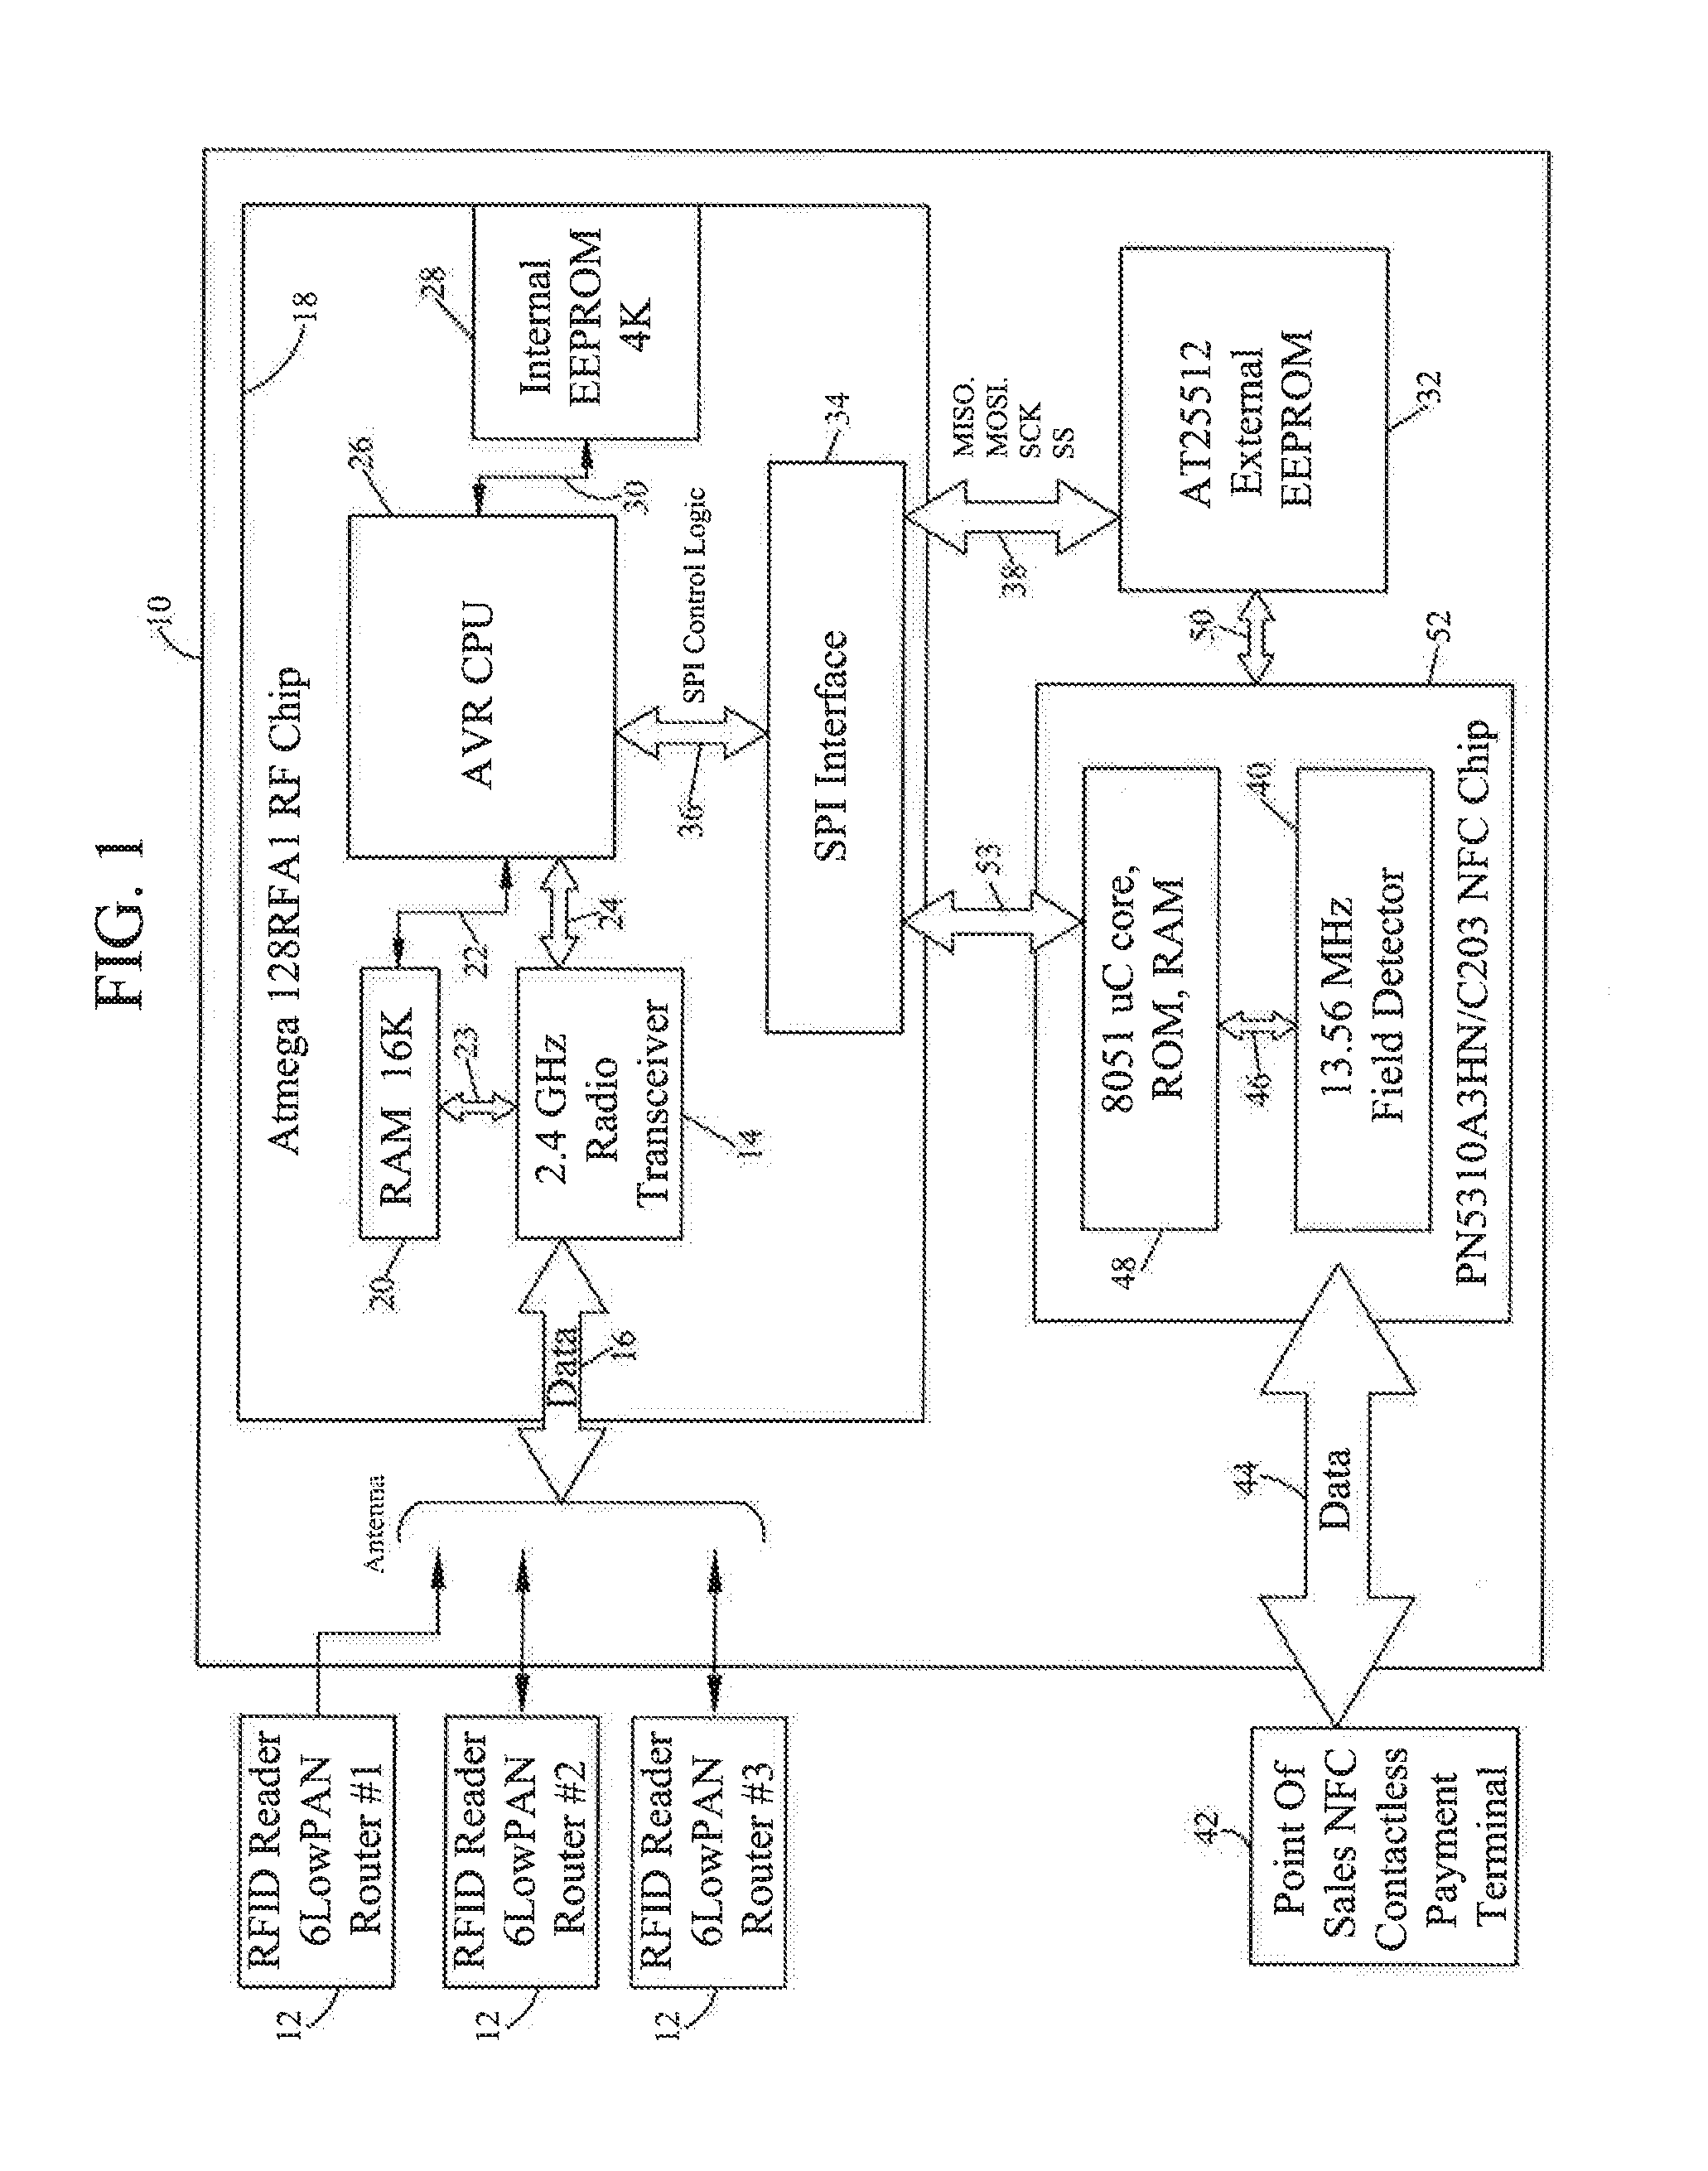 System And Method For Exchanging Information Bi-Directionally